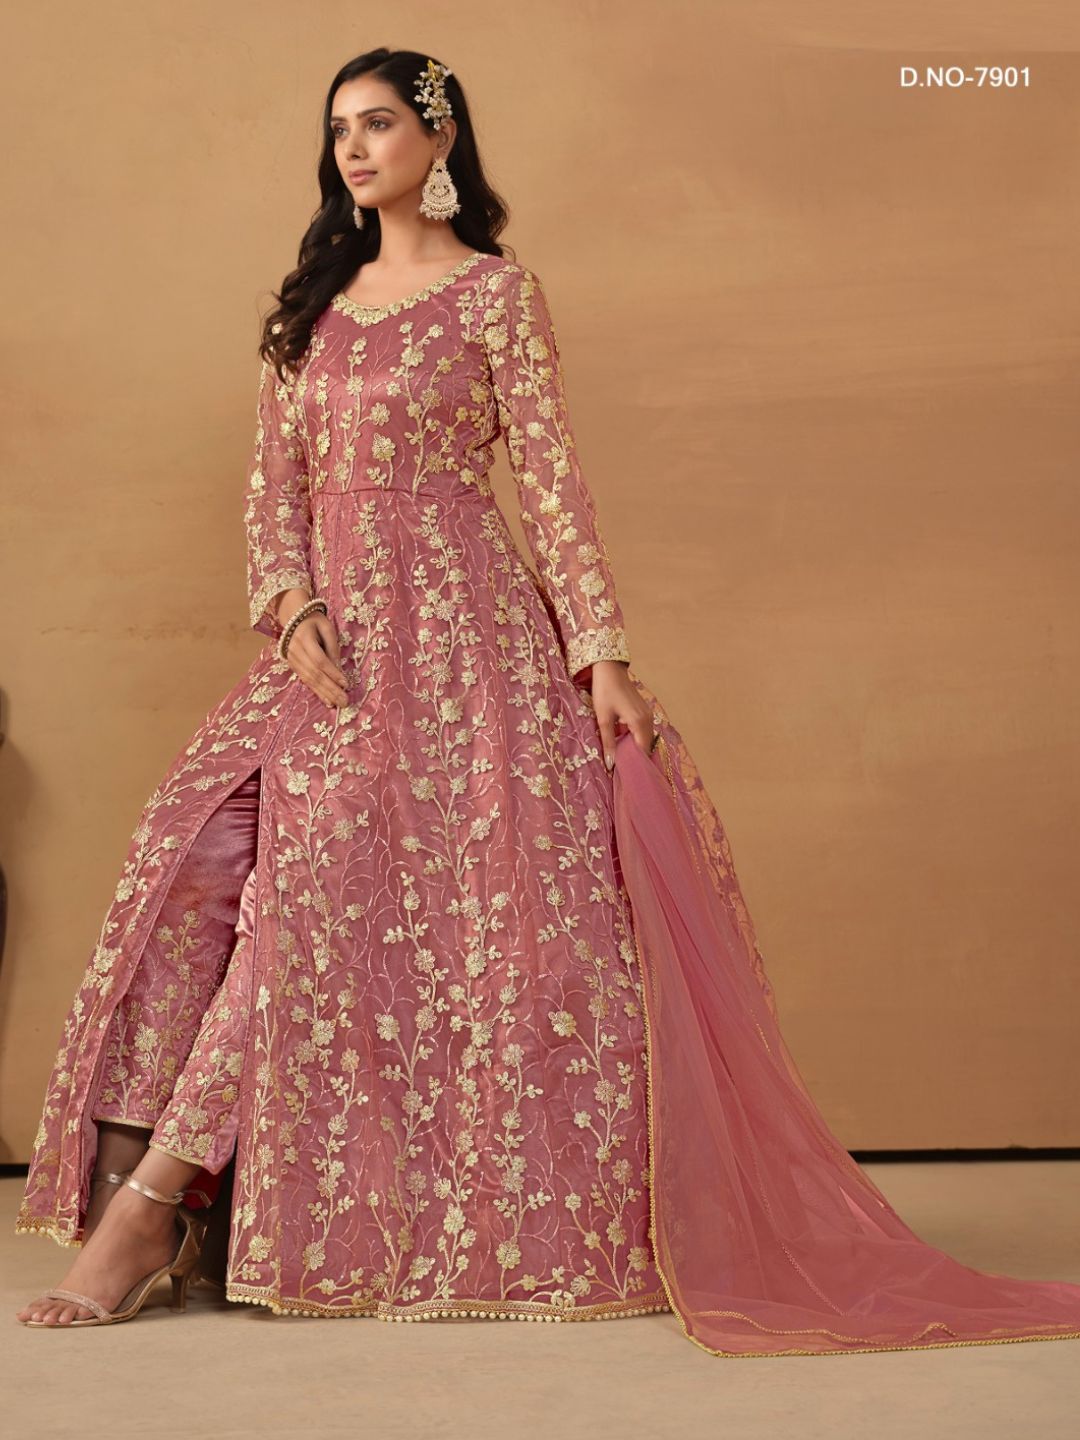 Net Embroidered Bollywood Salwar Kameez in Pink with Stone work-81993